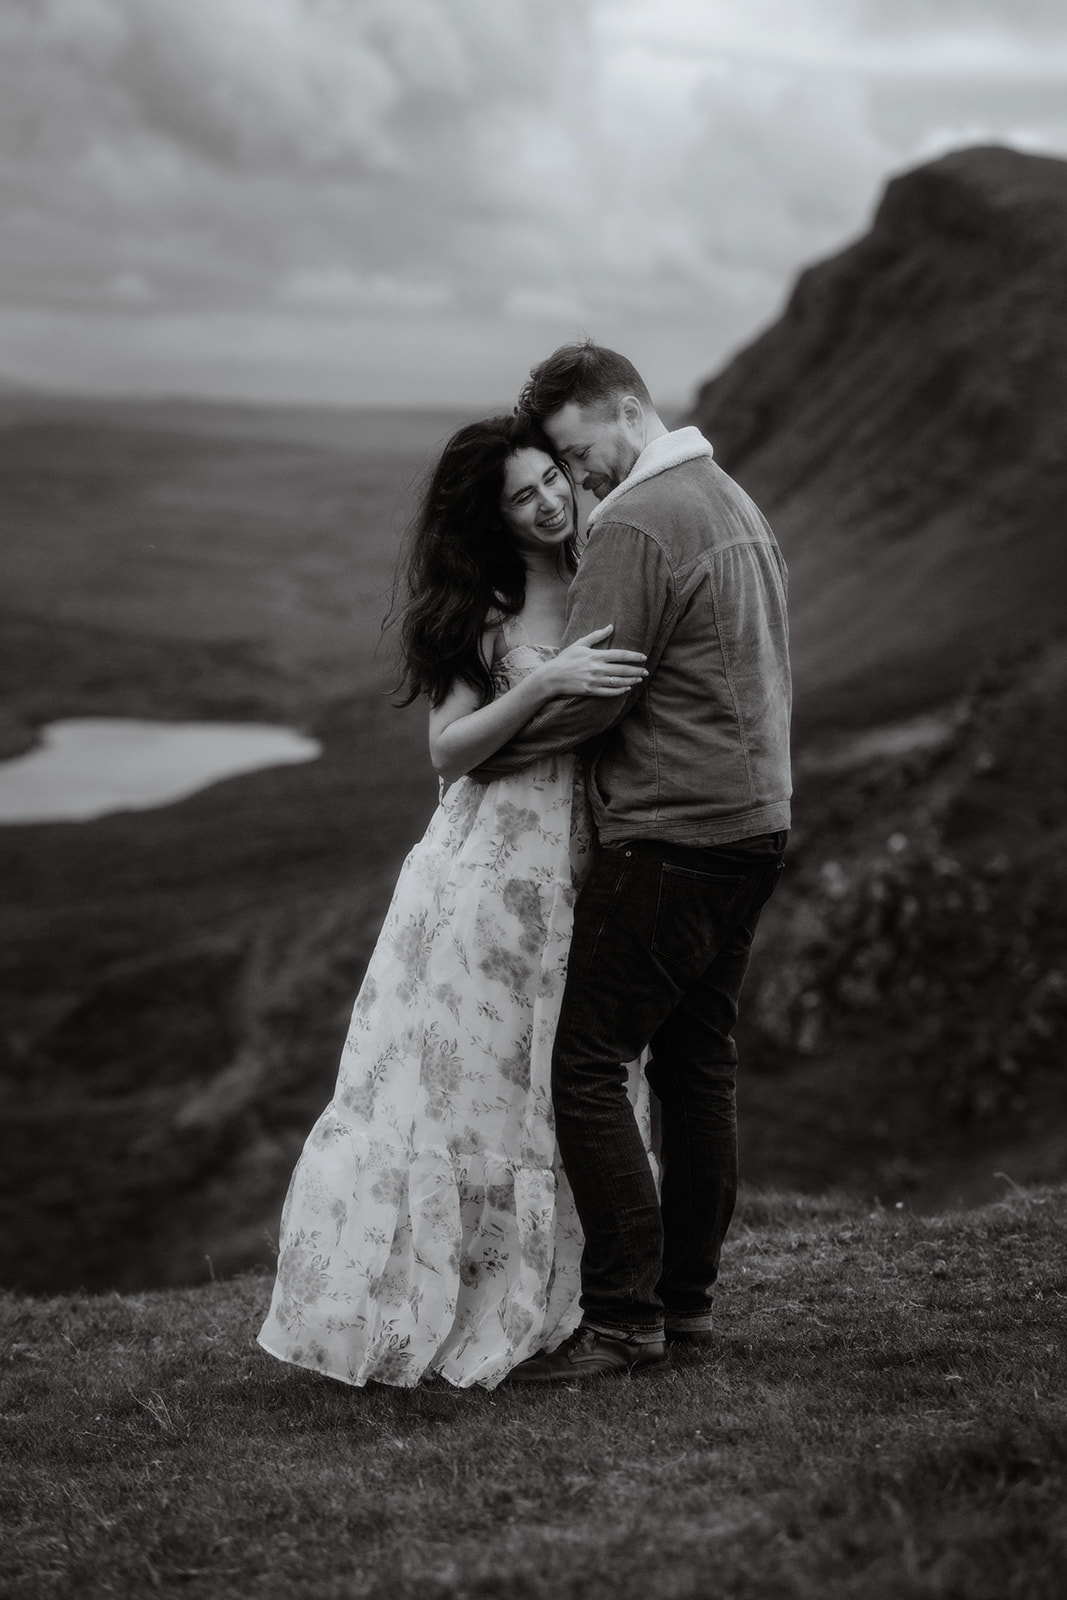 Alex and Elliot shared a romantic moment while having the majestic Quiraing, Isle of Skye, Scotland as their backdrop